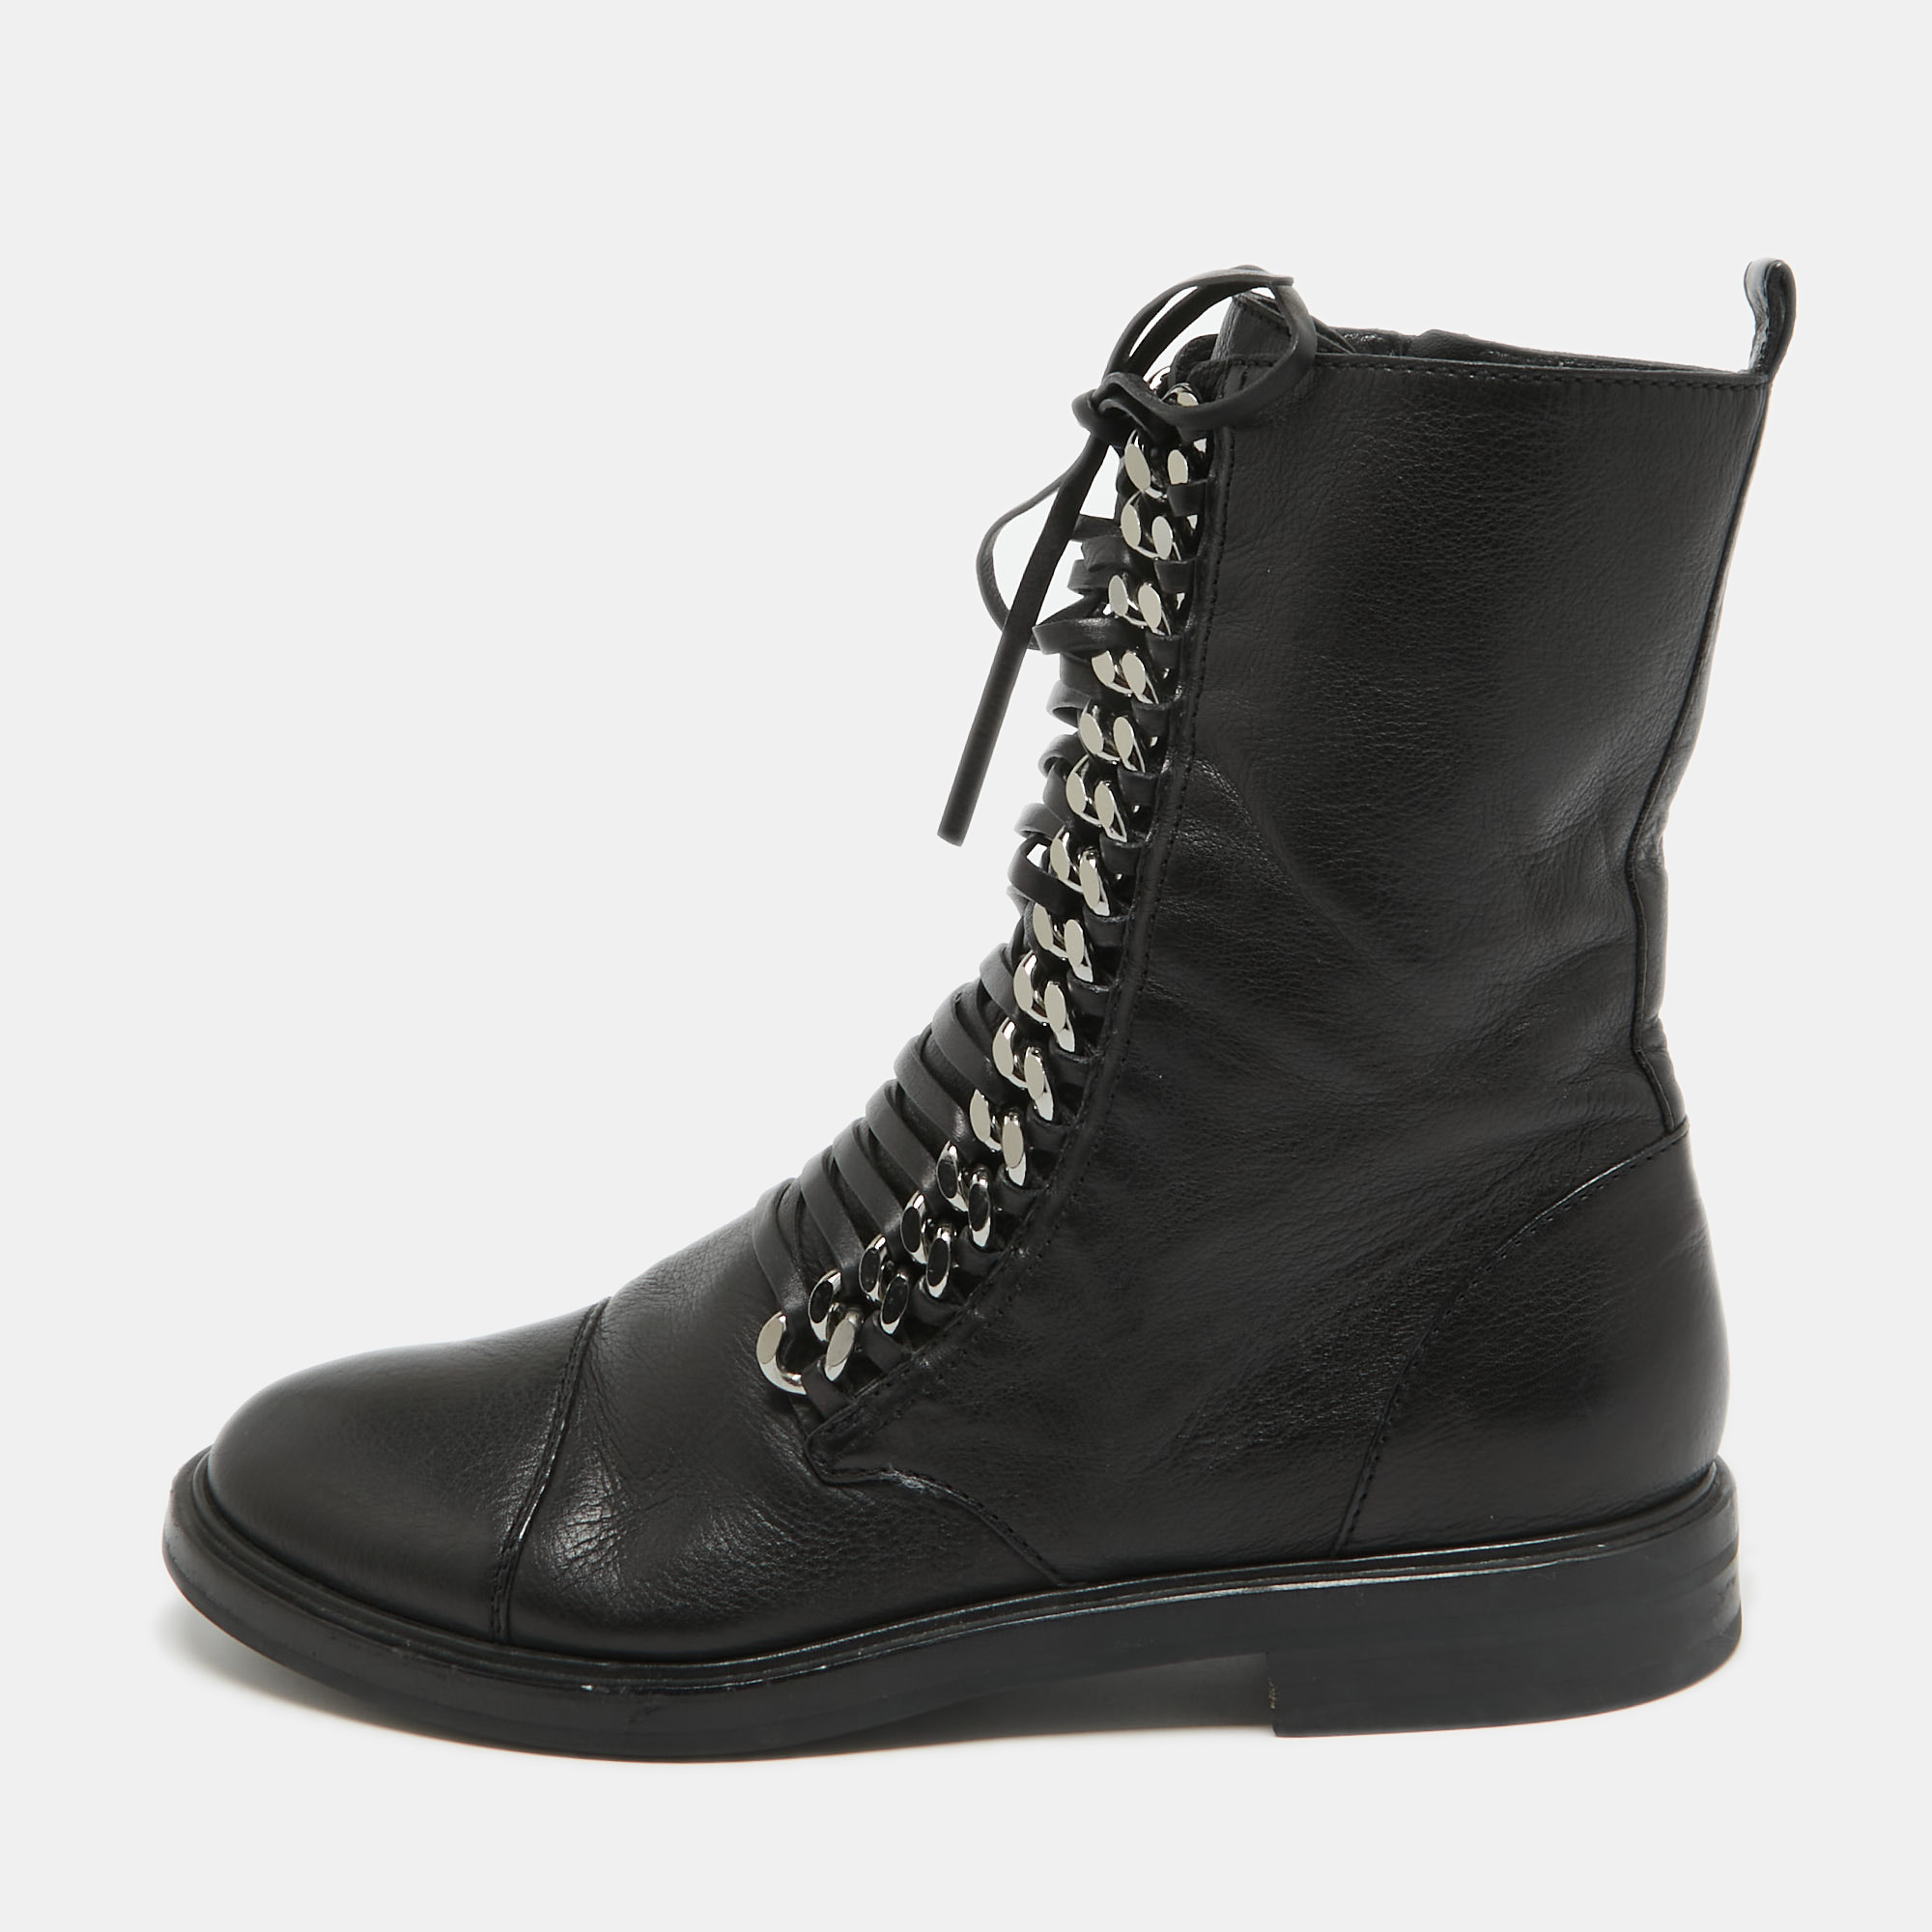 Boots are an essential part of your wardrobe and these boots crafted from top quality materials are a fine choice. Offering the best of comfort and style this sturdy soled pair would be great with a dress for a casual day out